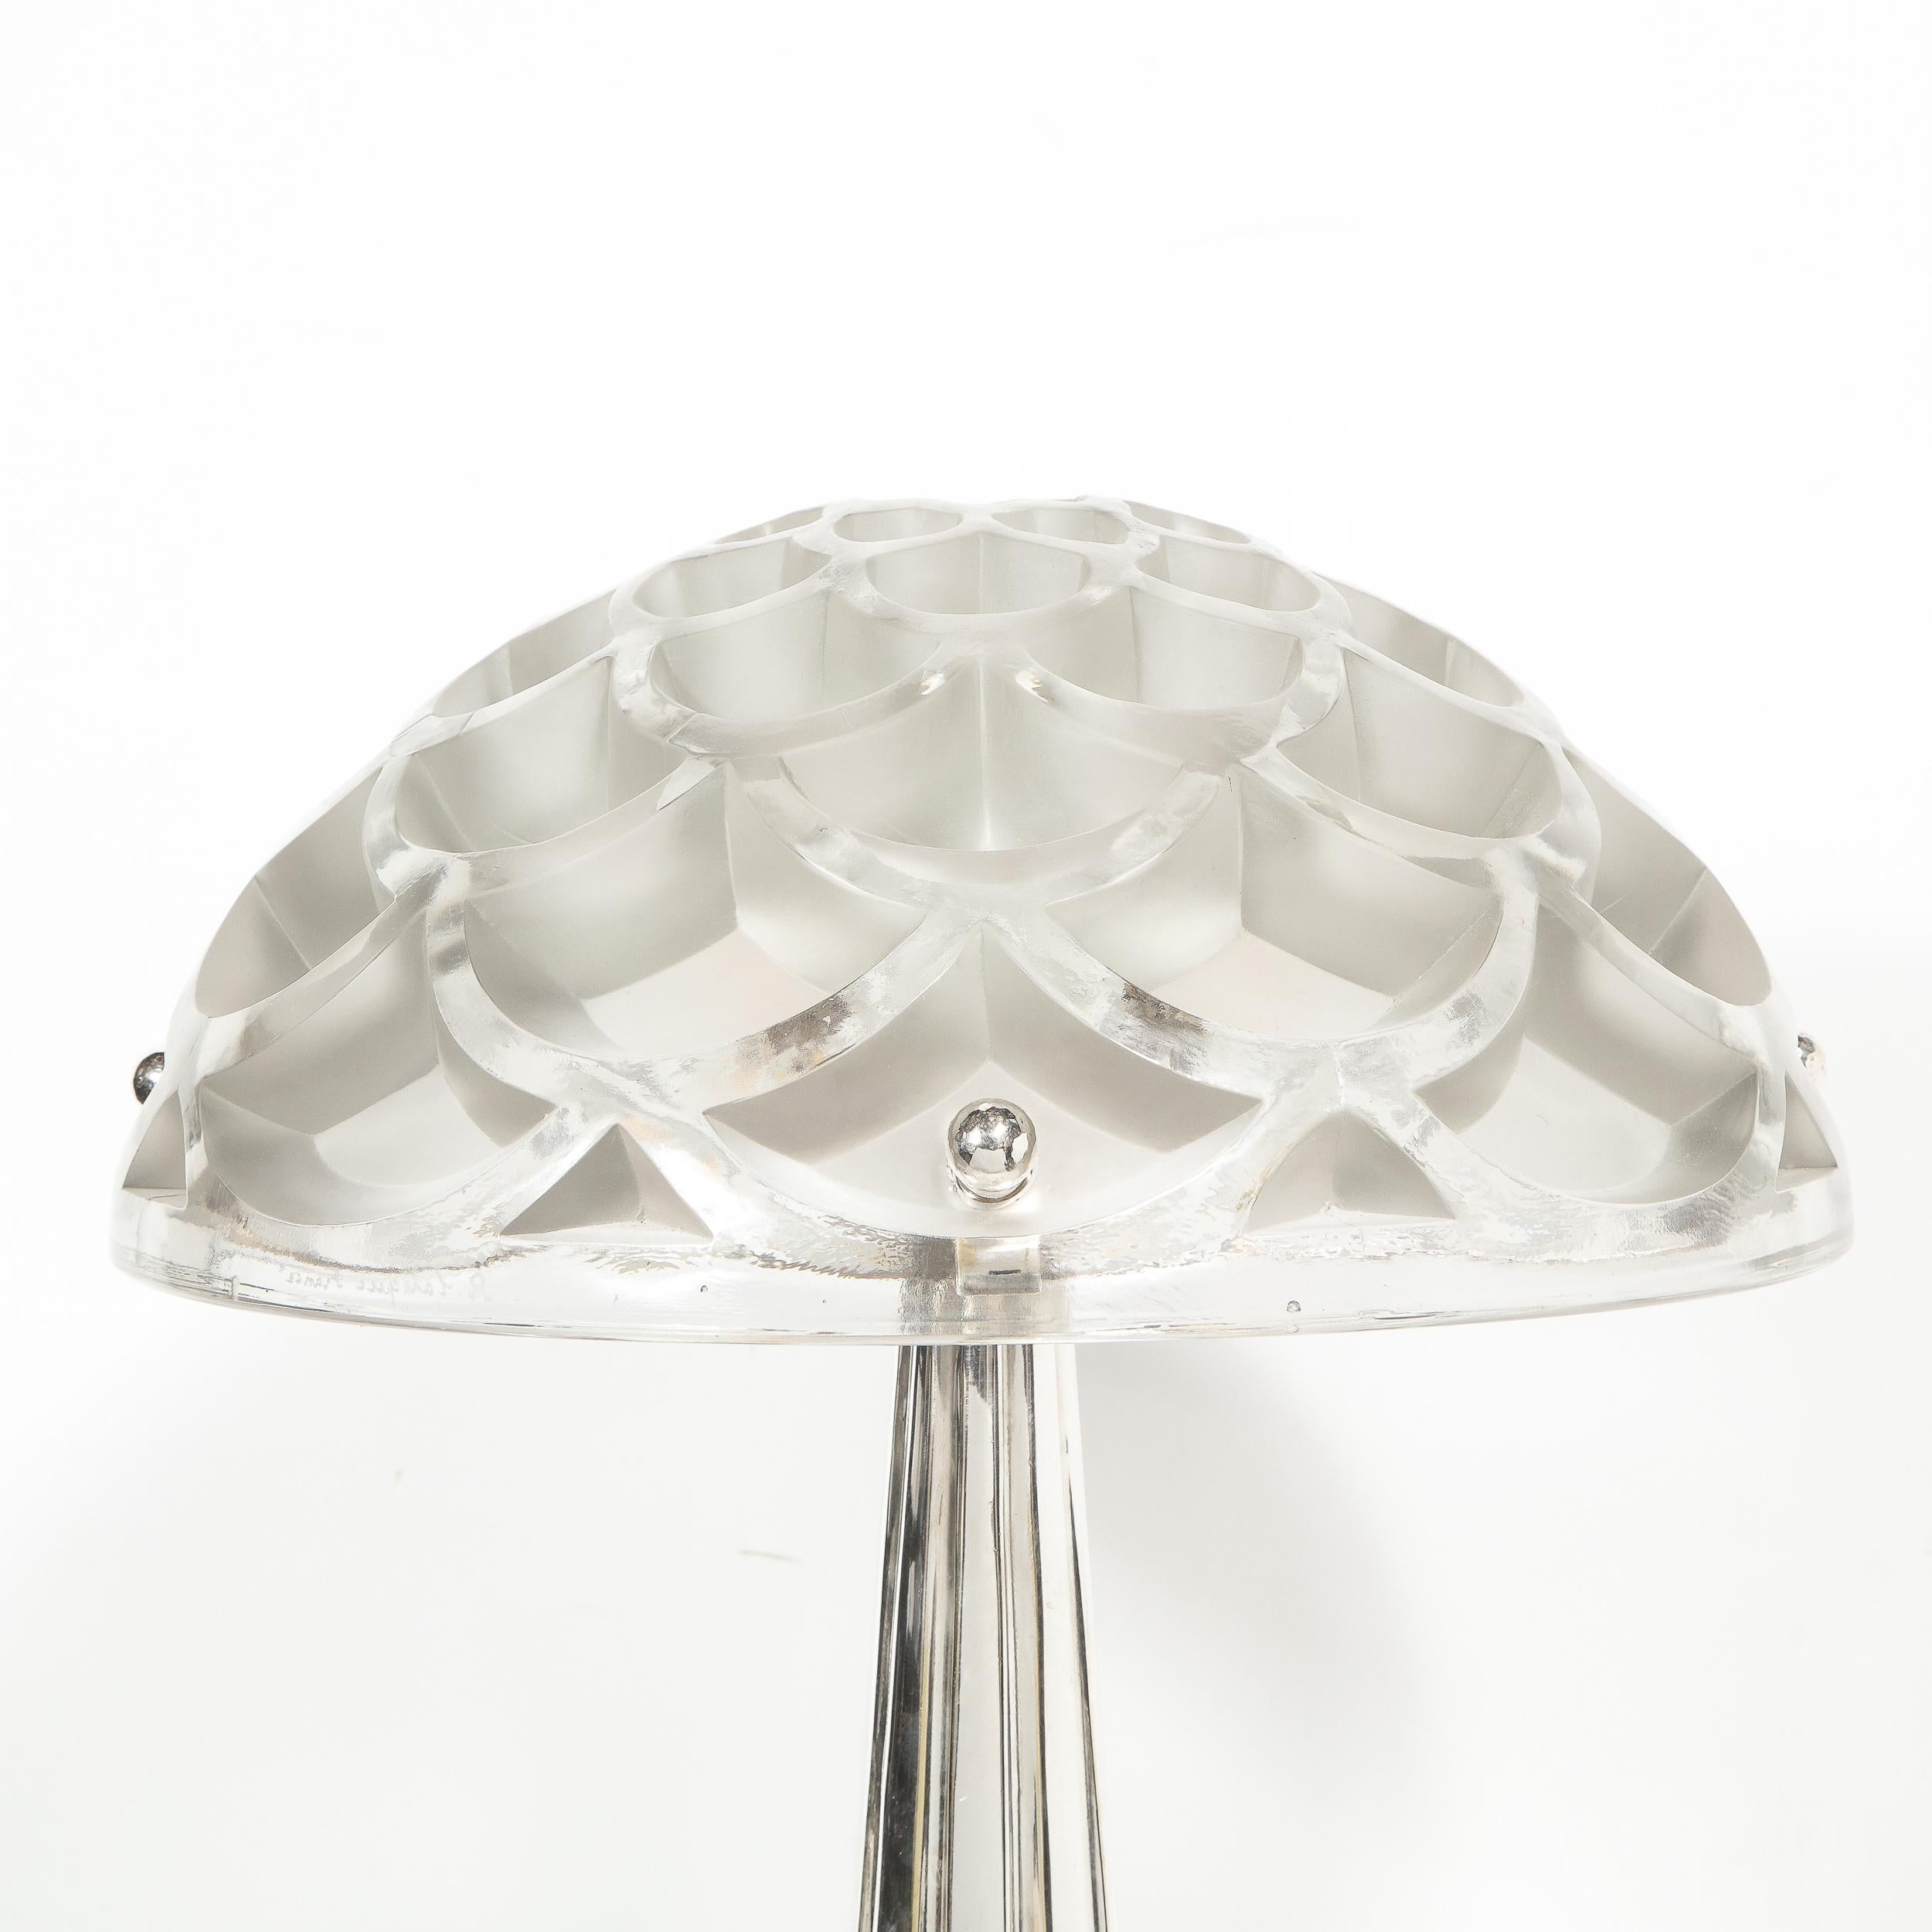 This stunning Art Deco style lamp was realized by the illustrious studios of René Lalique- one of the most celebrated designers in the history of glass making in France. It features a tiered circular base whose top is finely striated with a sunburst